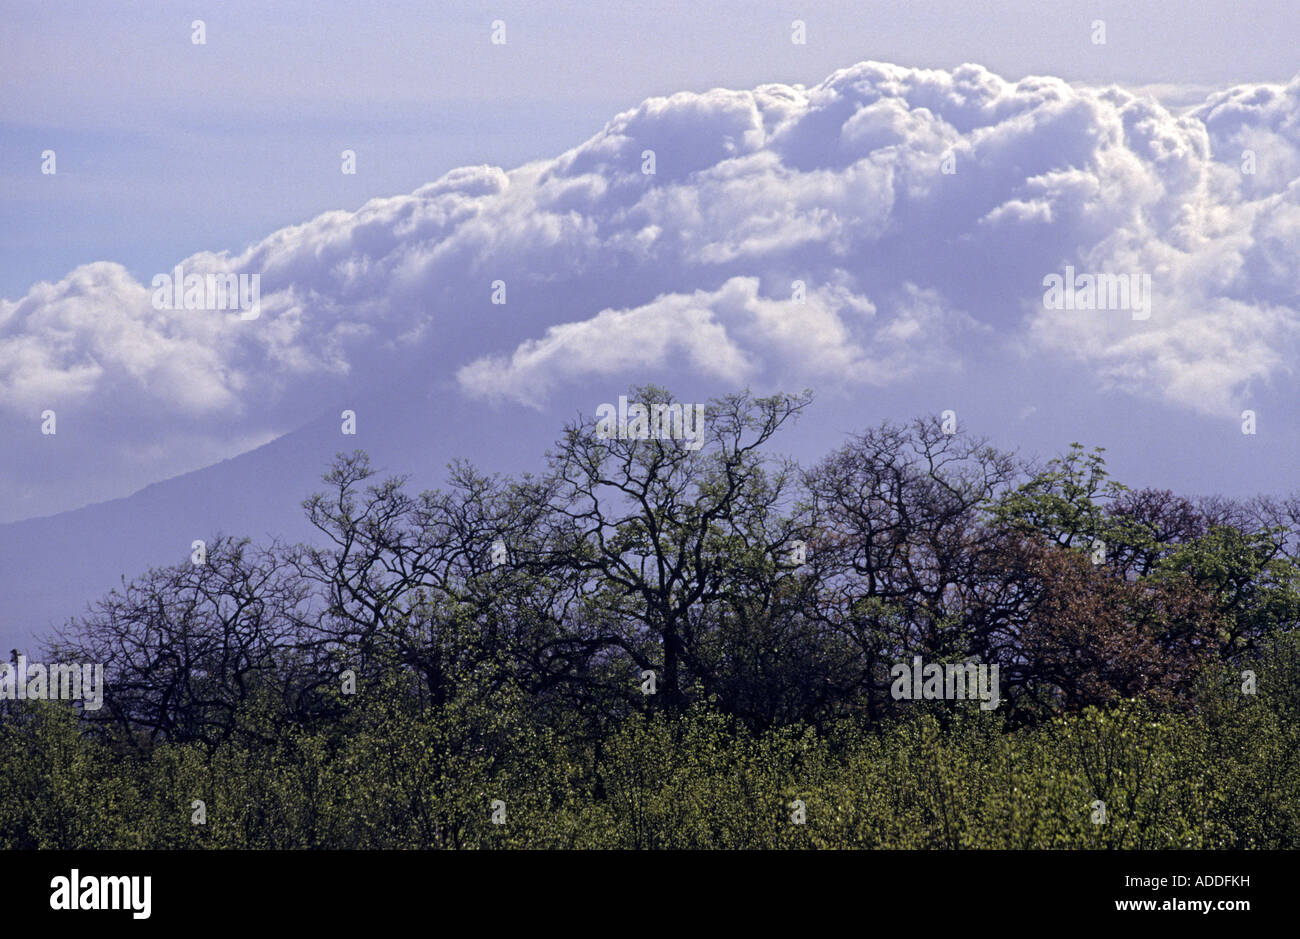 Pacific coast tropical dry forest and volcano shrouded in cloud Santa Rosa National Park Guanacaste Costa Rica Stock Photo